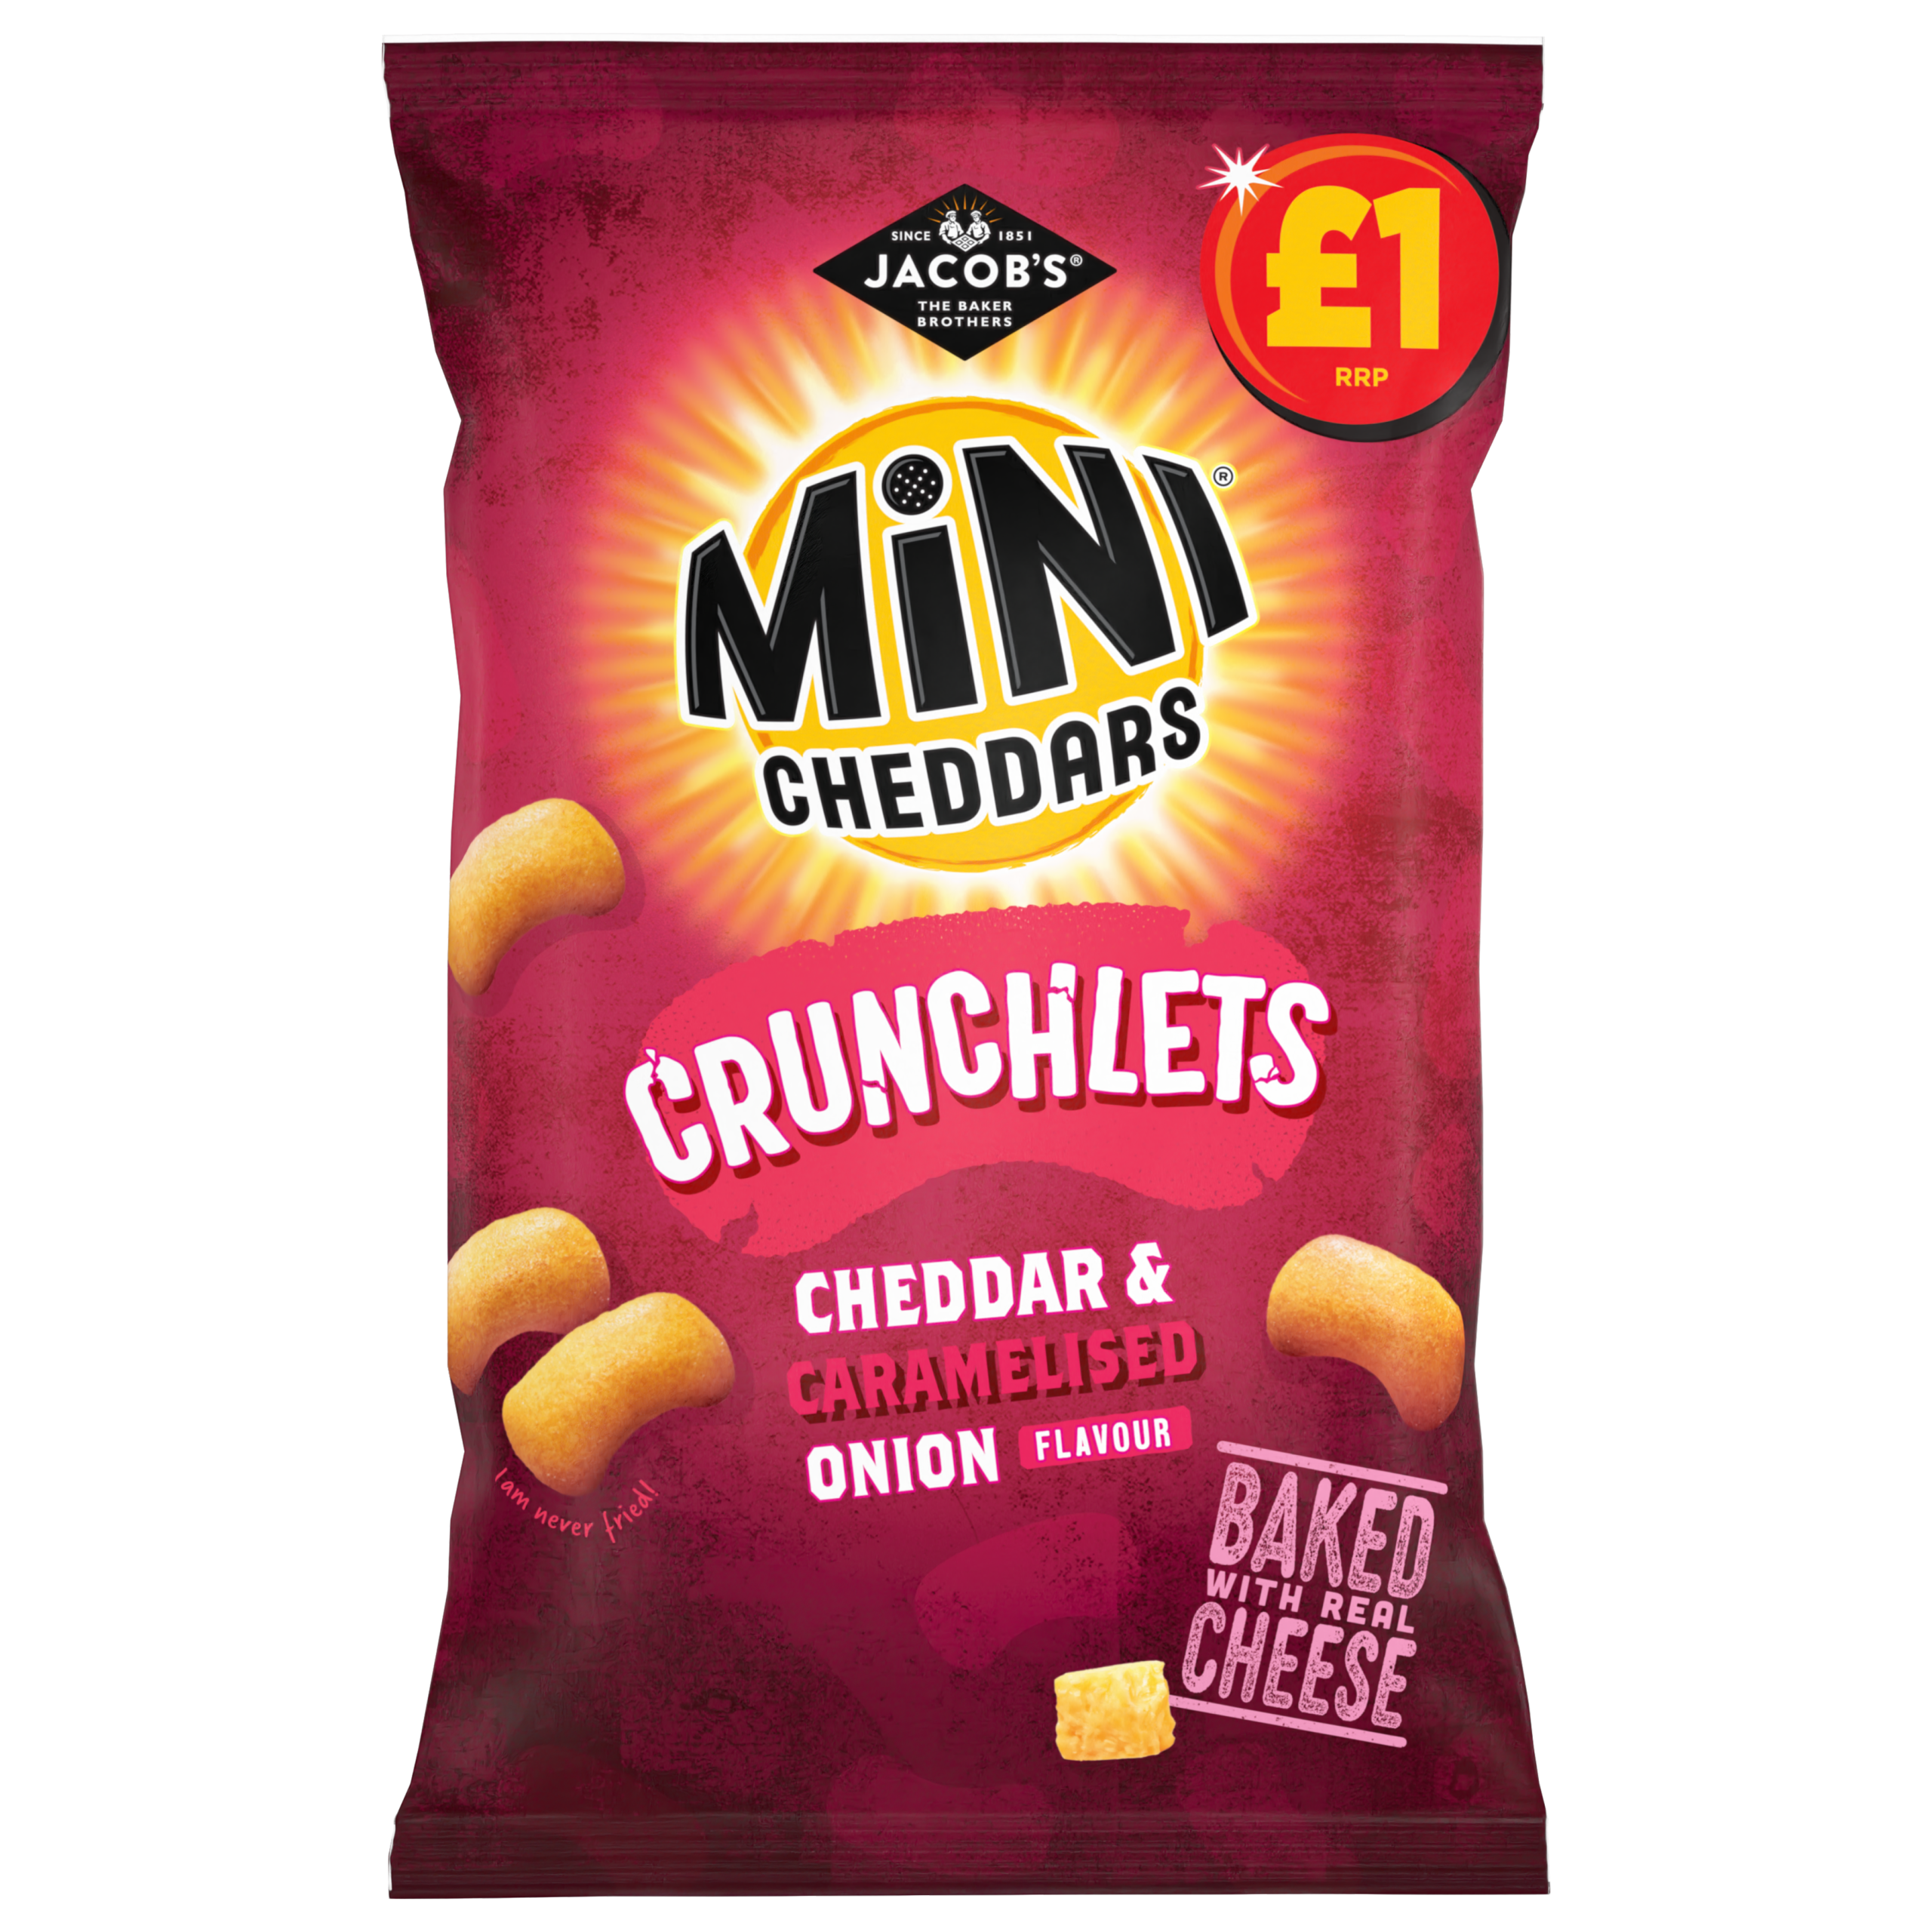 pladis launches lighter new format  with Jacob’s Mini Cheddars Crunchlets